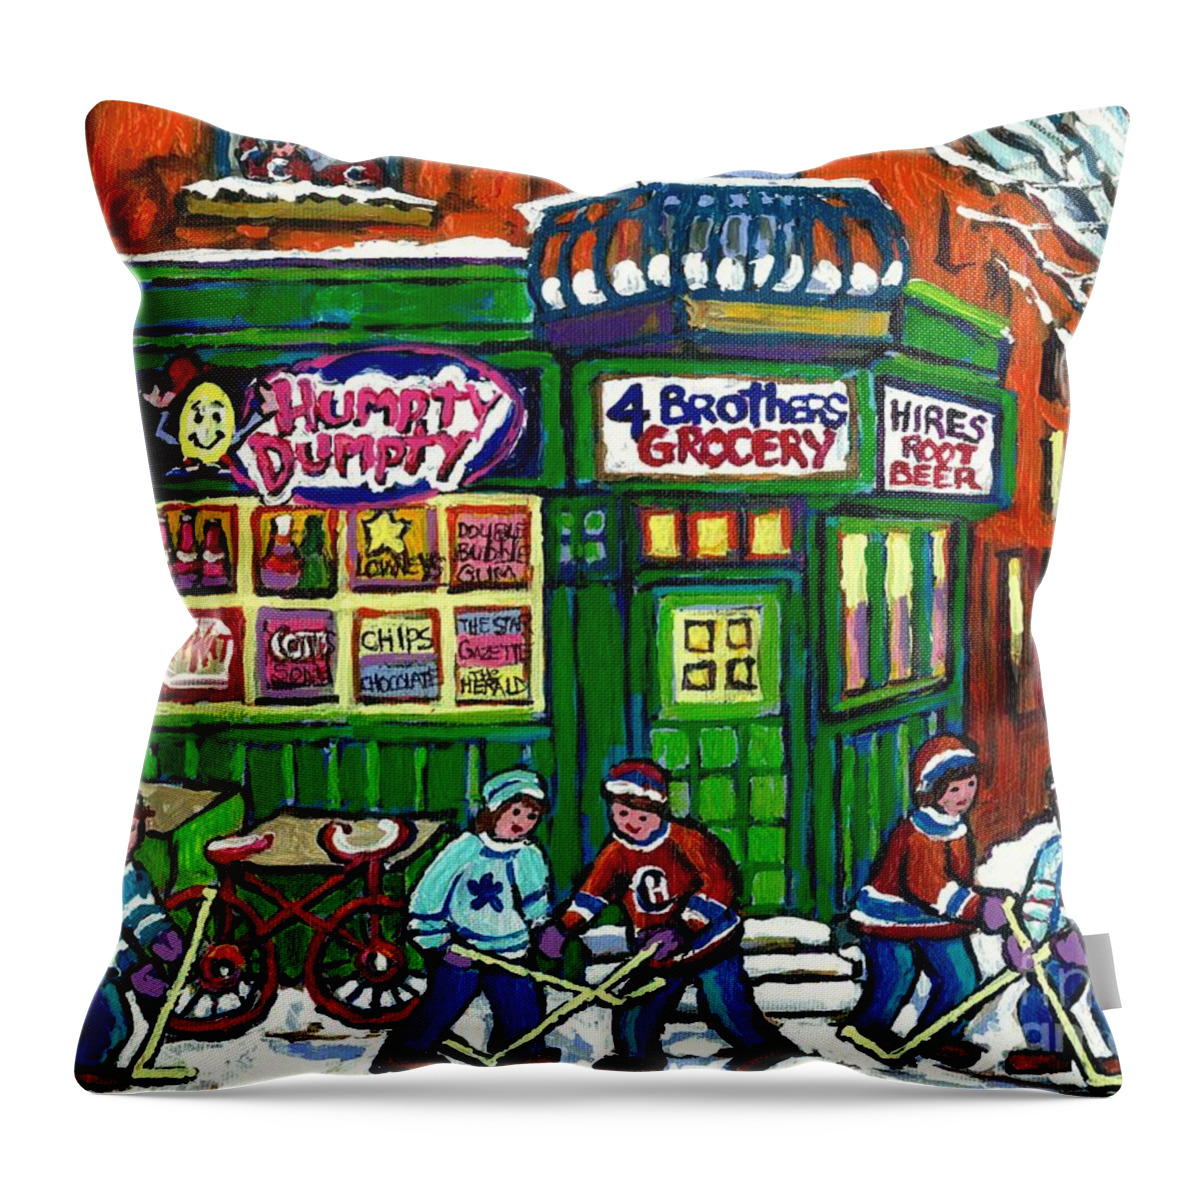 Montreal Throw Pillow featuring the painting Corner Store Paintings Vintage Grocery Humpty Dumpty 4 Brothers Hires Root Beer Truck Canadian Art by Carole Spandau